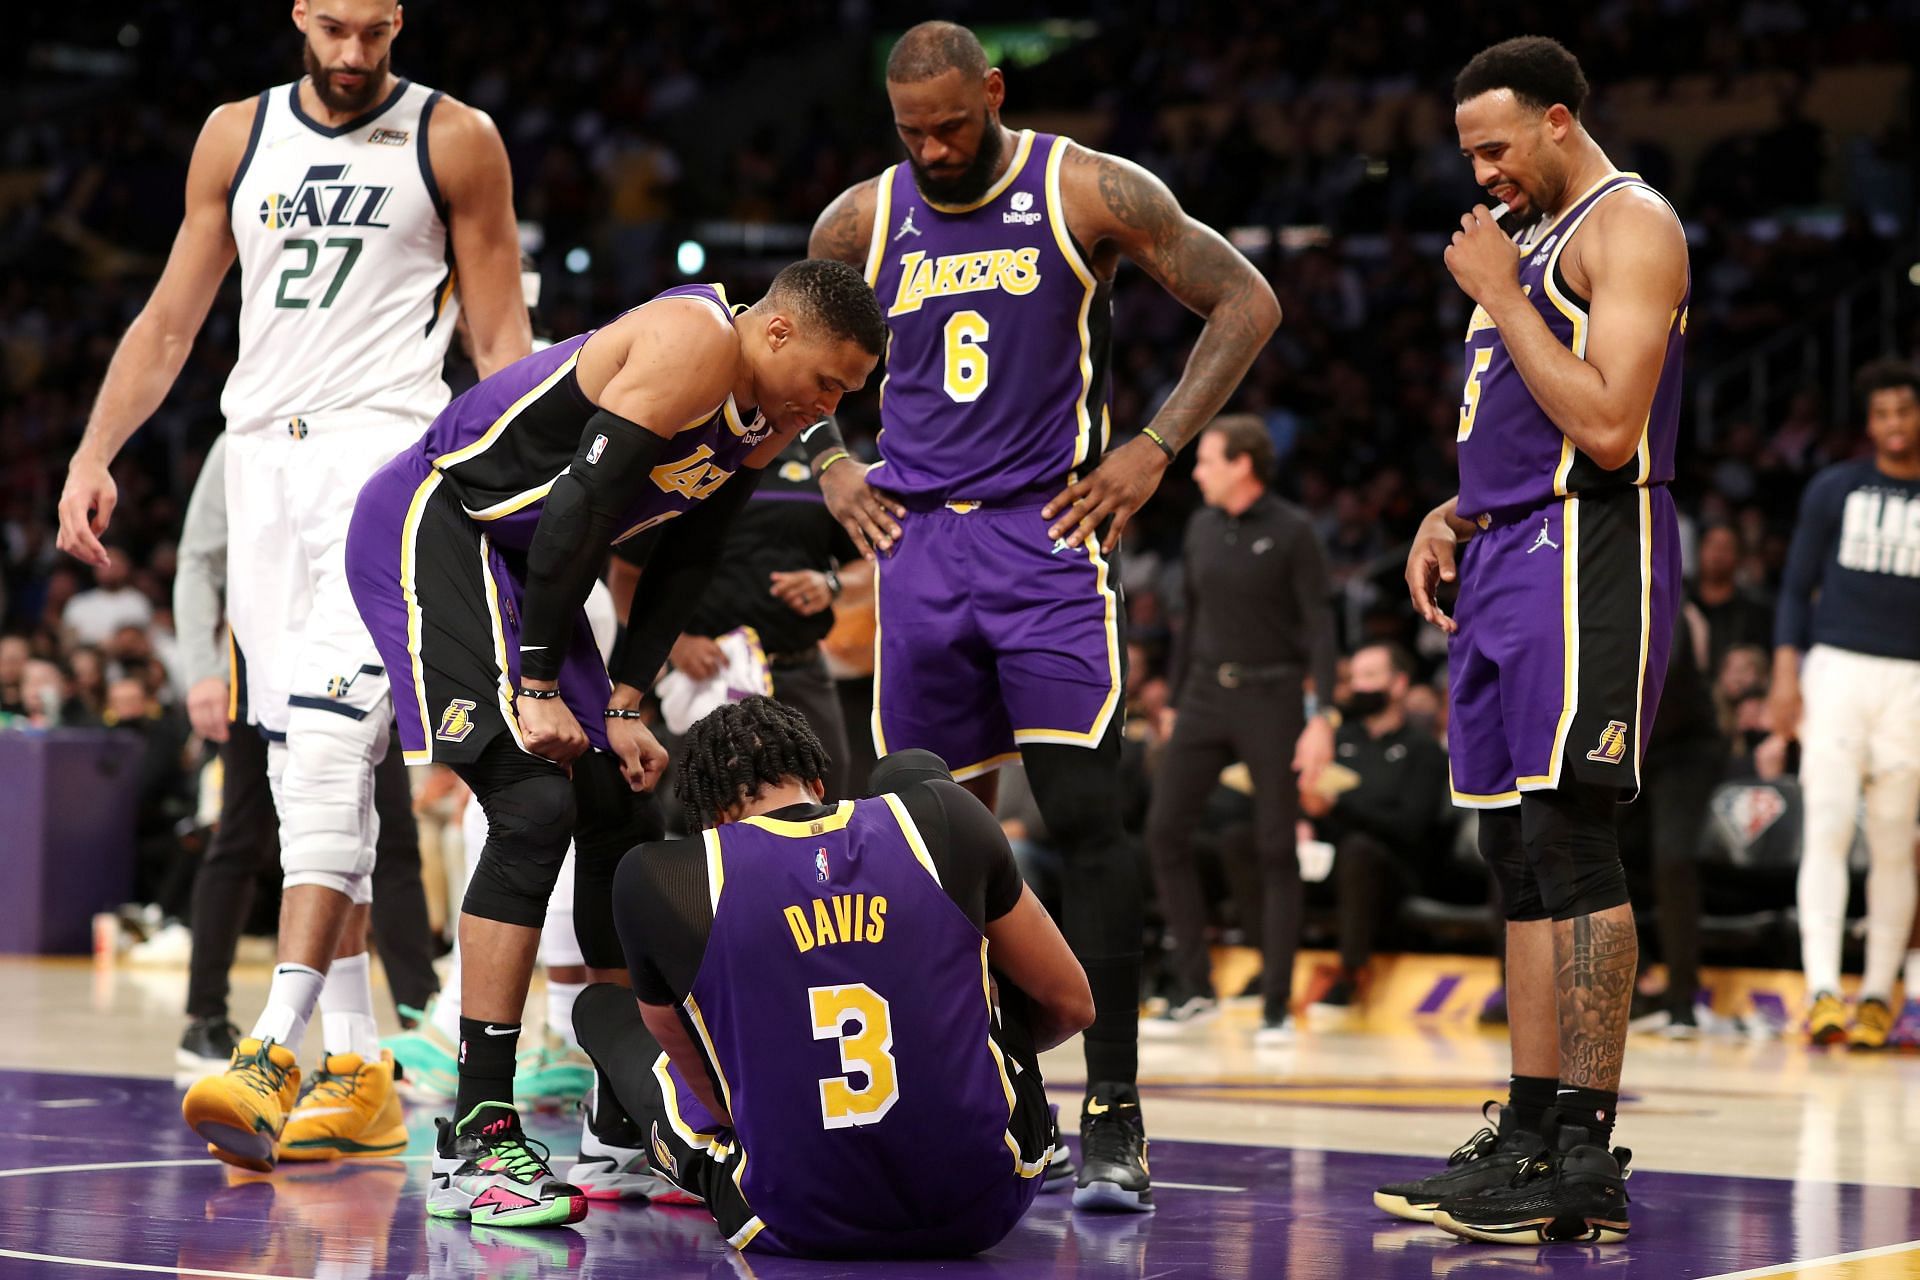 Russell Westbrook, LeBron James (6) and Talen Horton-Tucker (5) of the LA Lakers check on Anthony Davis after an ankle injury against the Utah Jazz on Feb. 16 in Los Angeles, California.